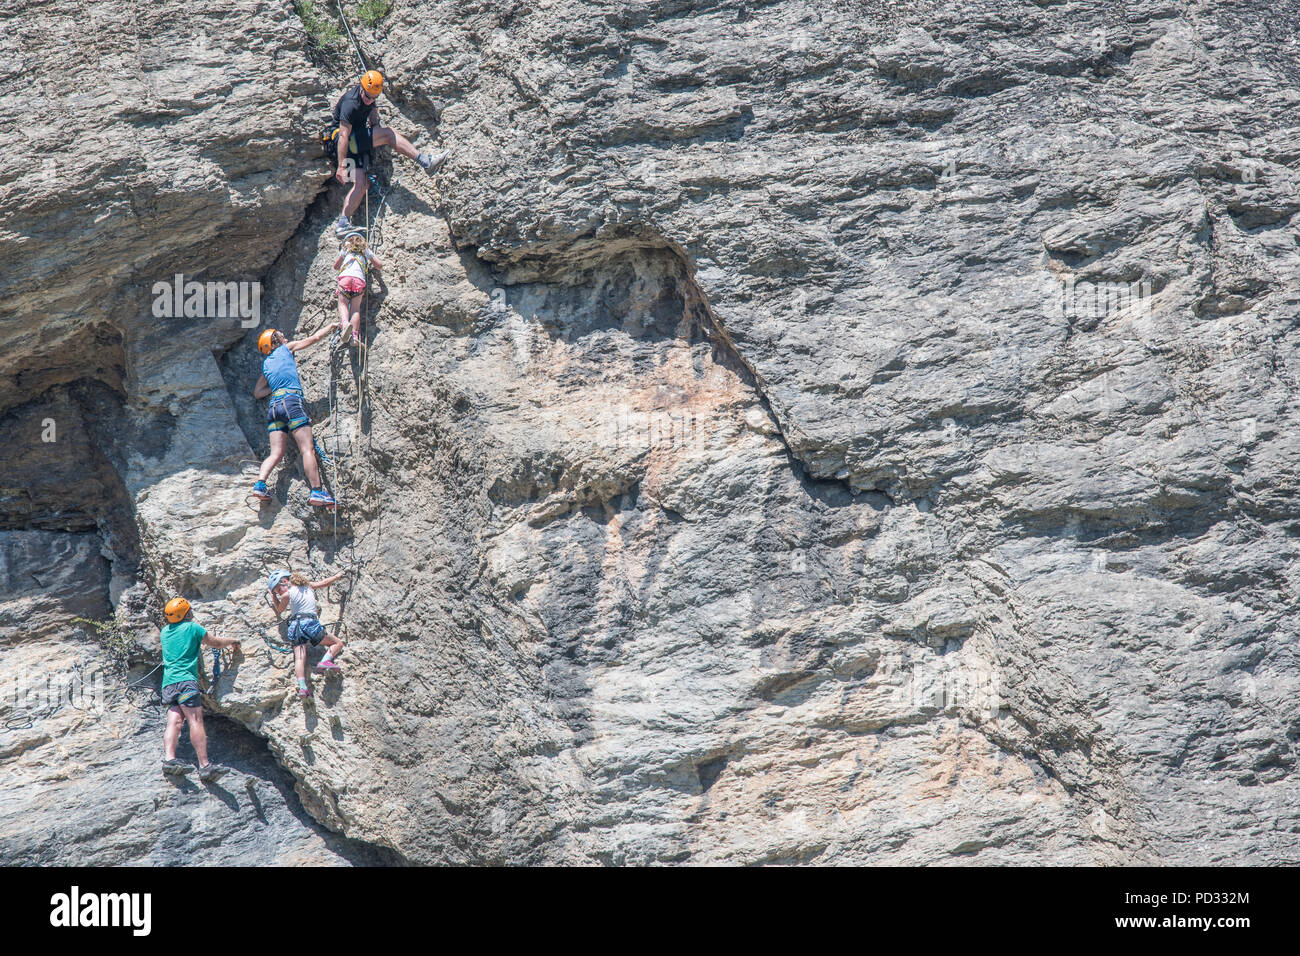 An english family on holiday at L'Argentierre la Bessee, France, climb the via ferrrata on the steep rocky cliff face to the clock tower. Stock Photo